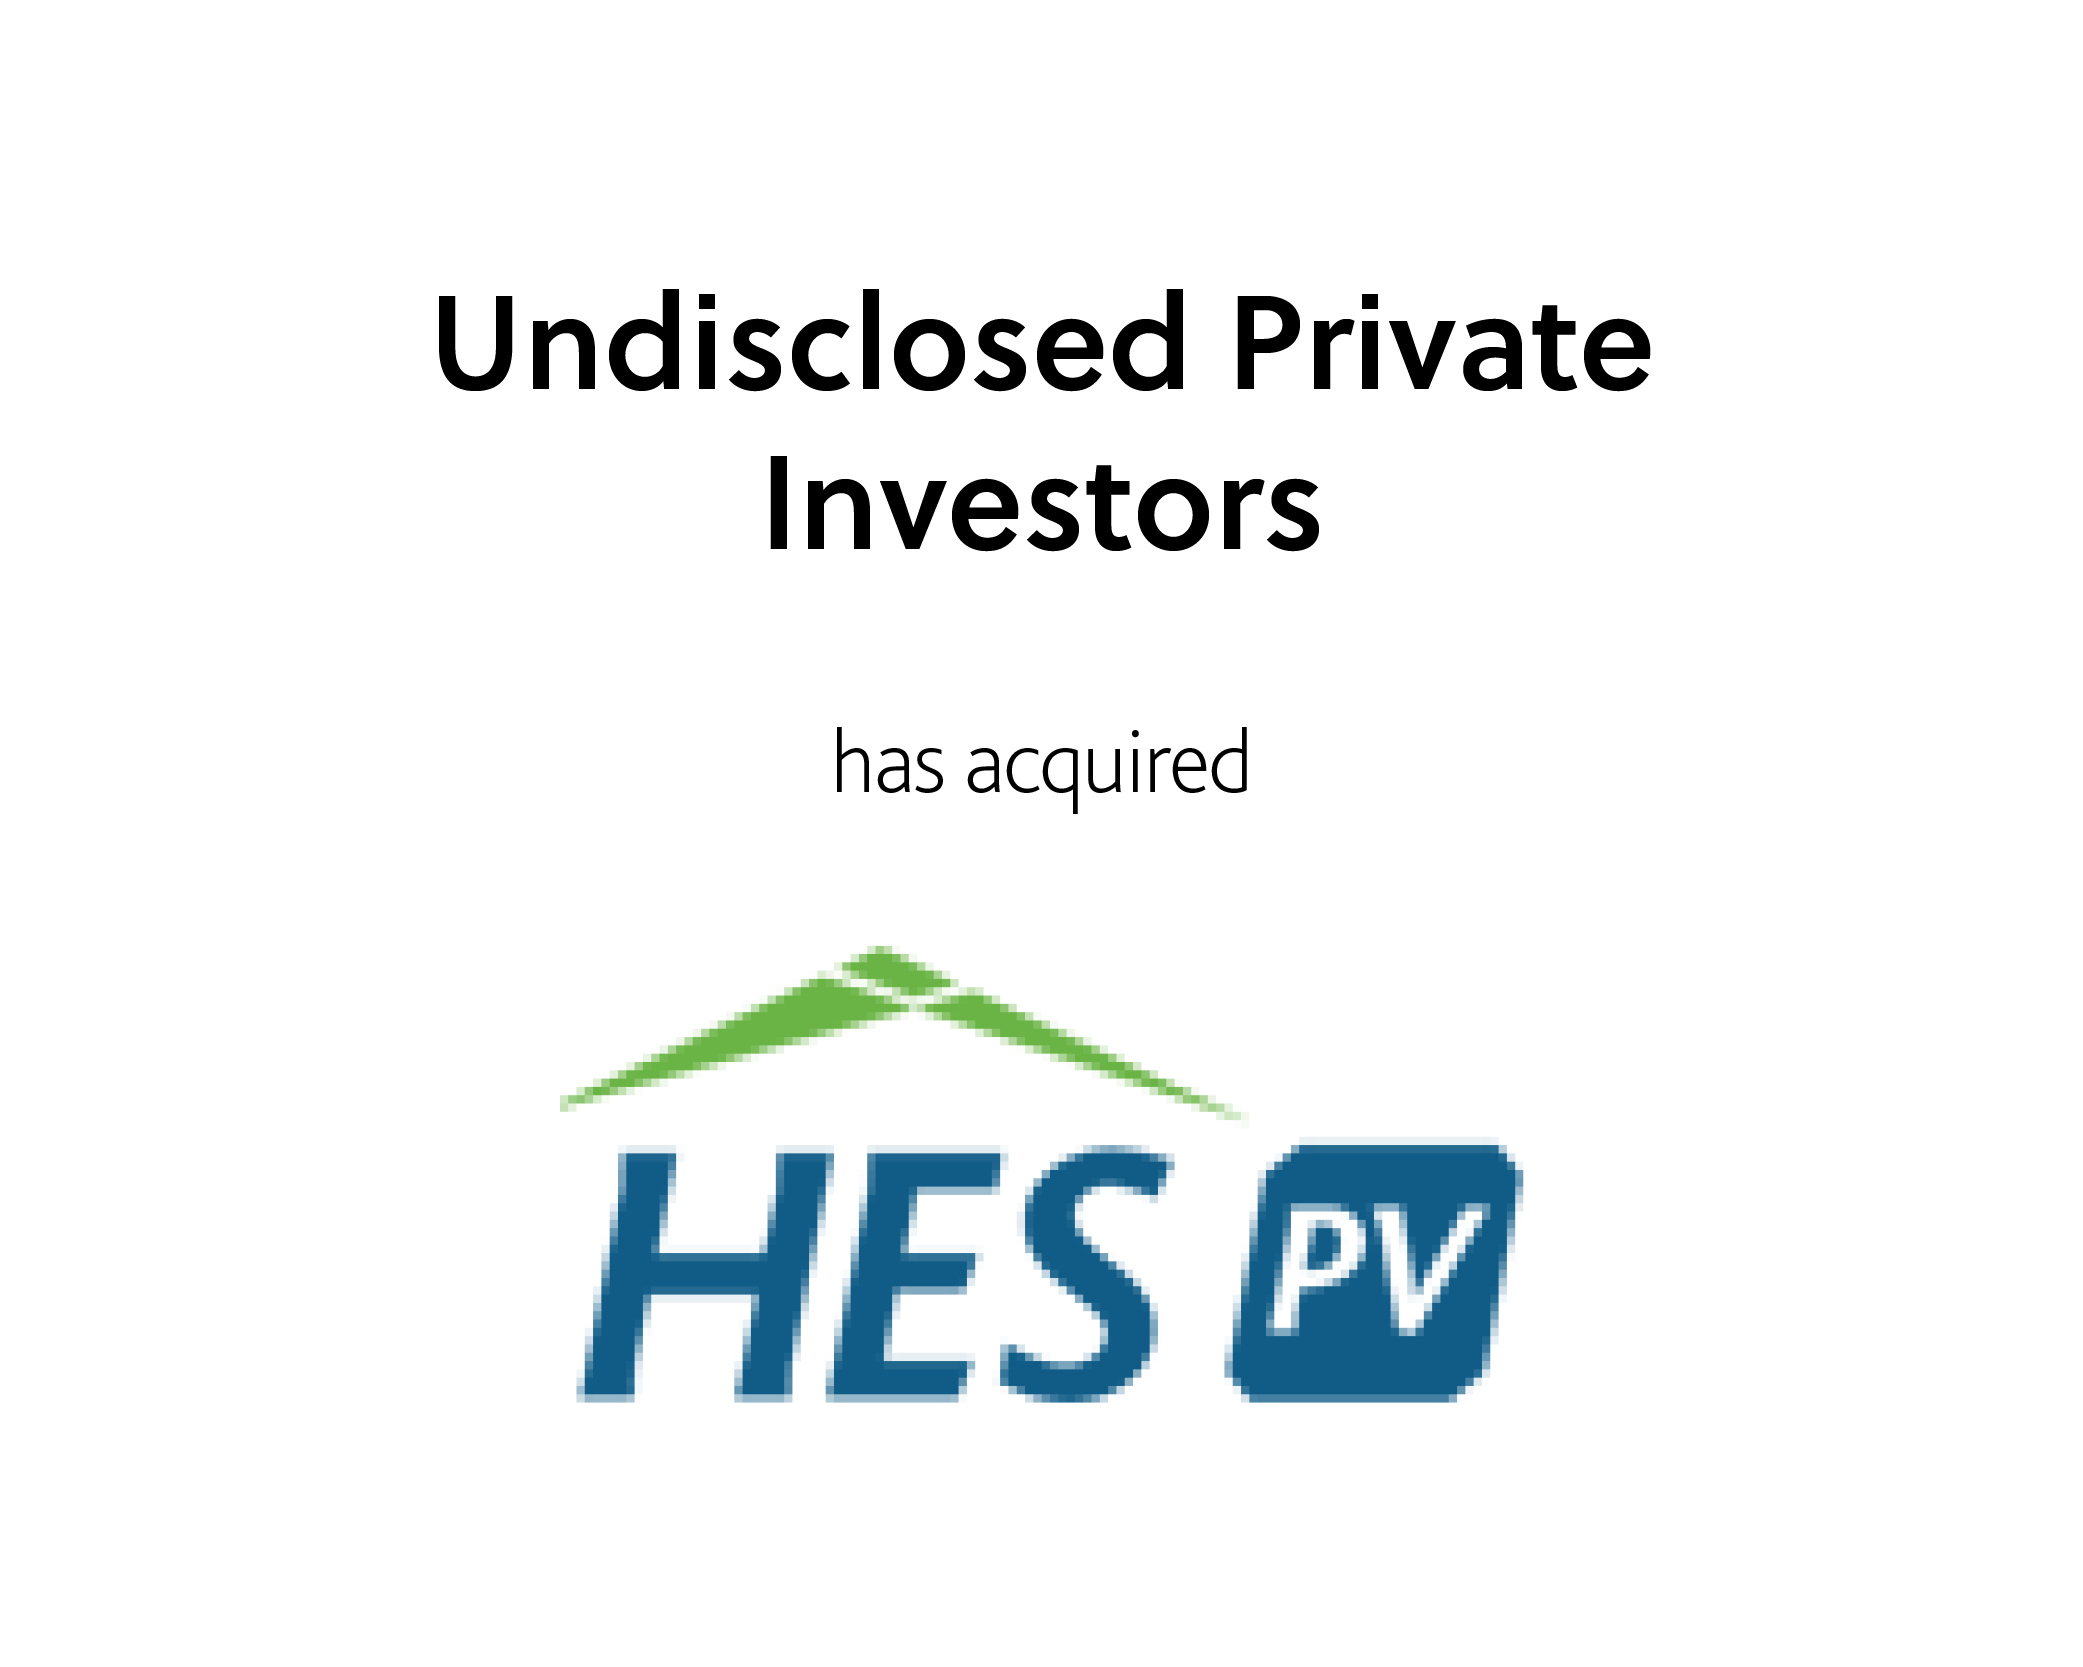 Undisclosed Private Investors have acquired HES PV Limited.